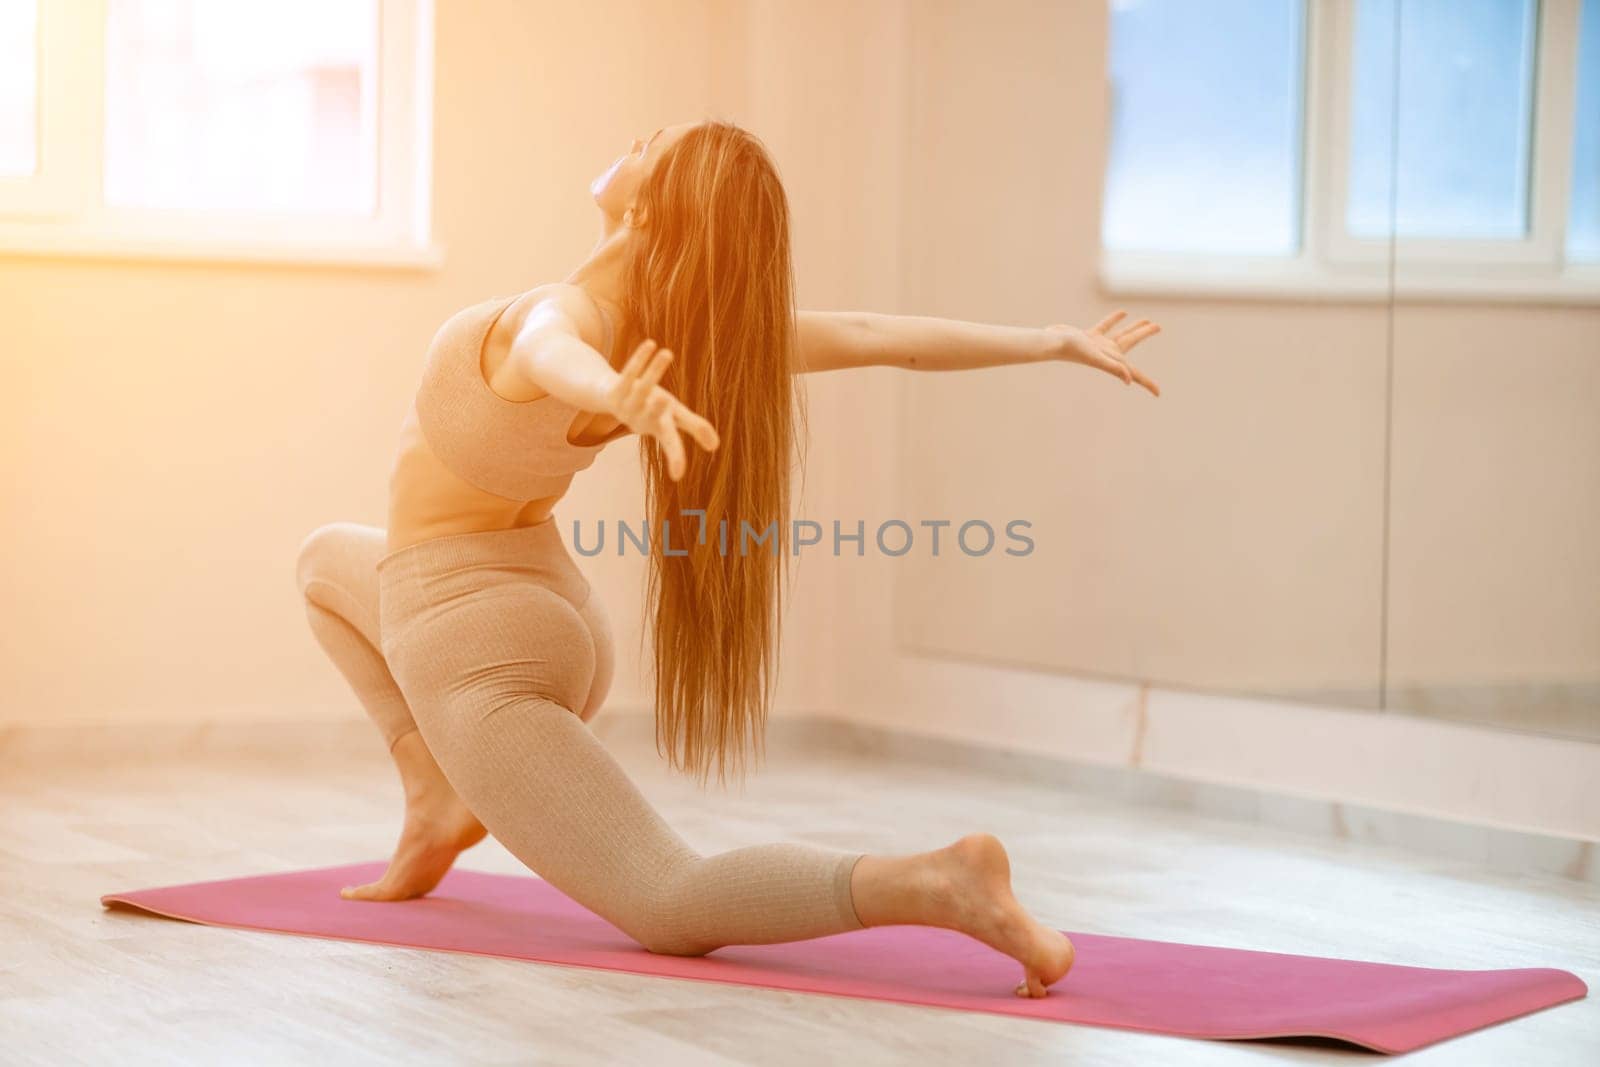 Girl does yoga. Young woman practices asanas on a beige one ton background